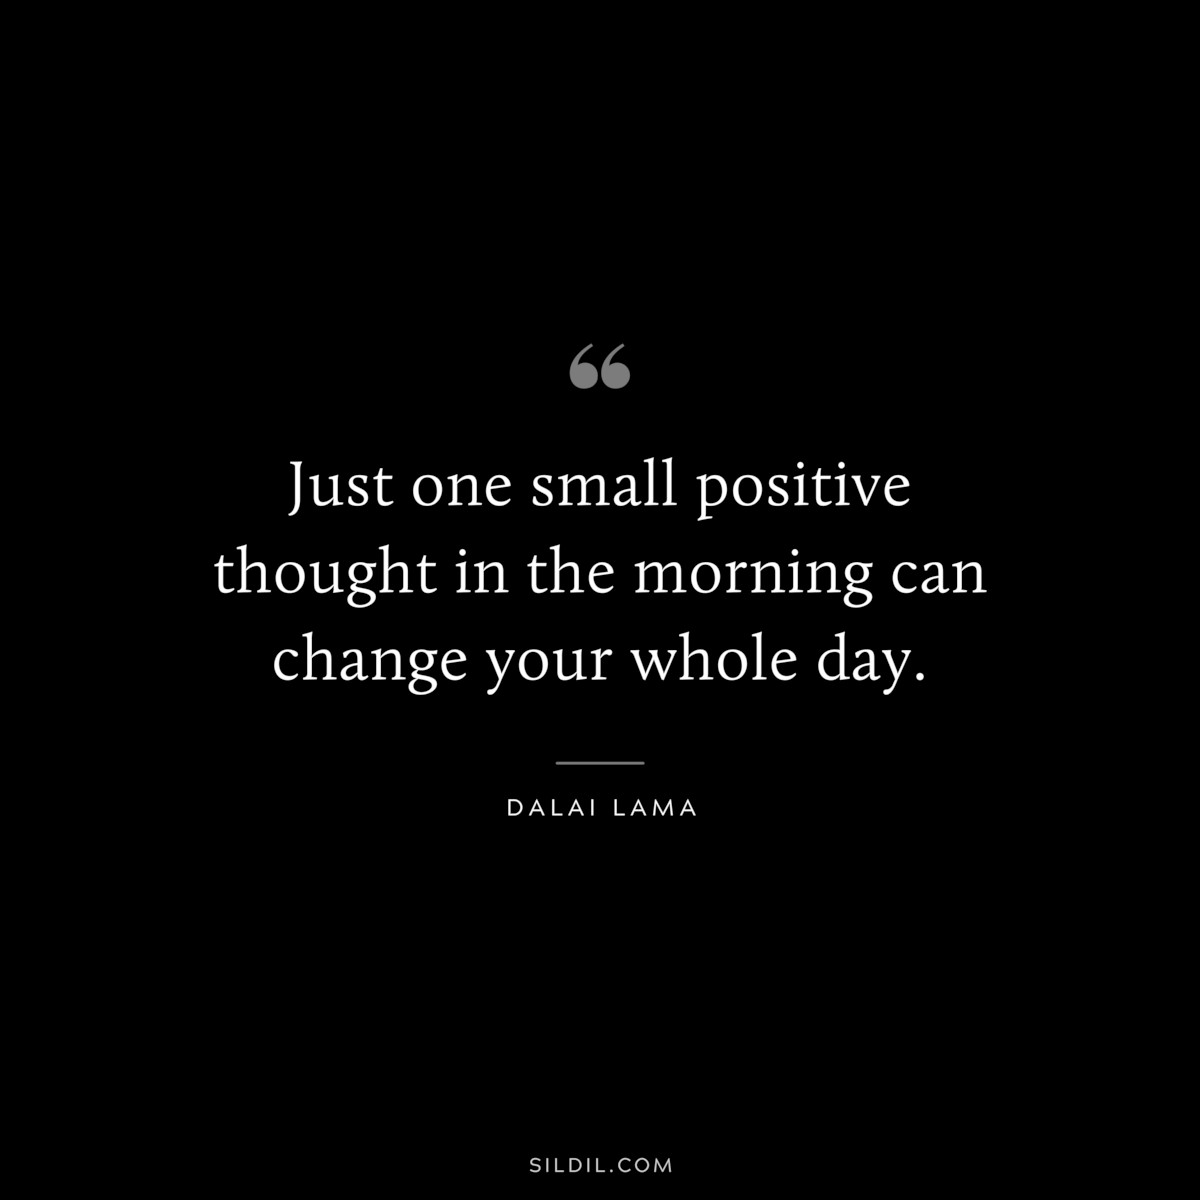 Just one small positive thought in the morning can change your whole day. ― Dalai Lama